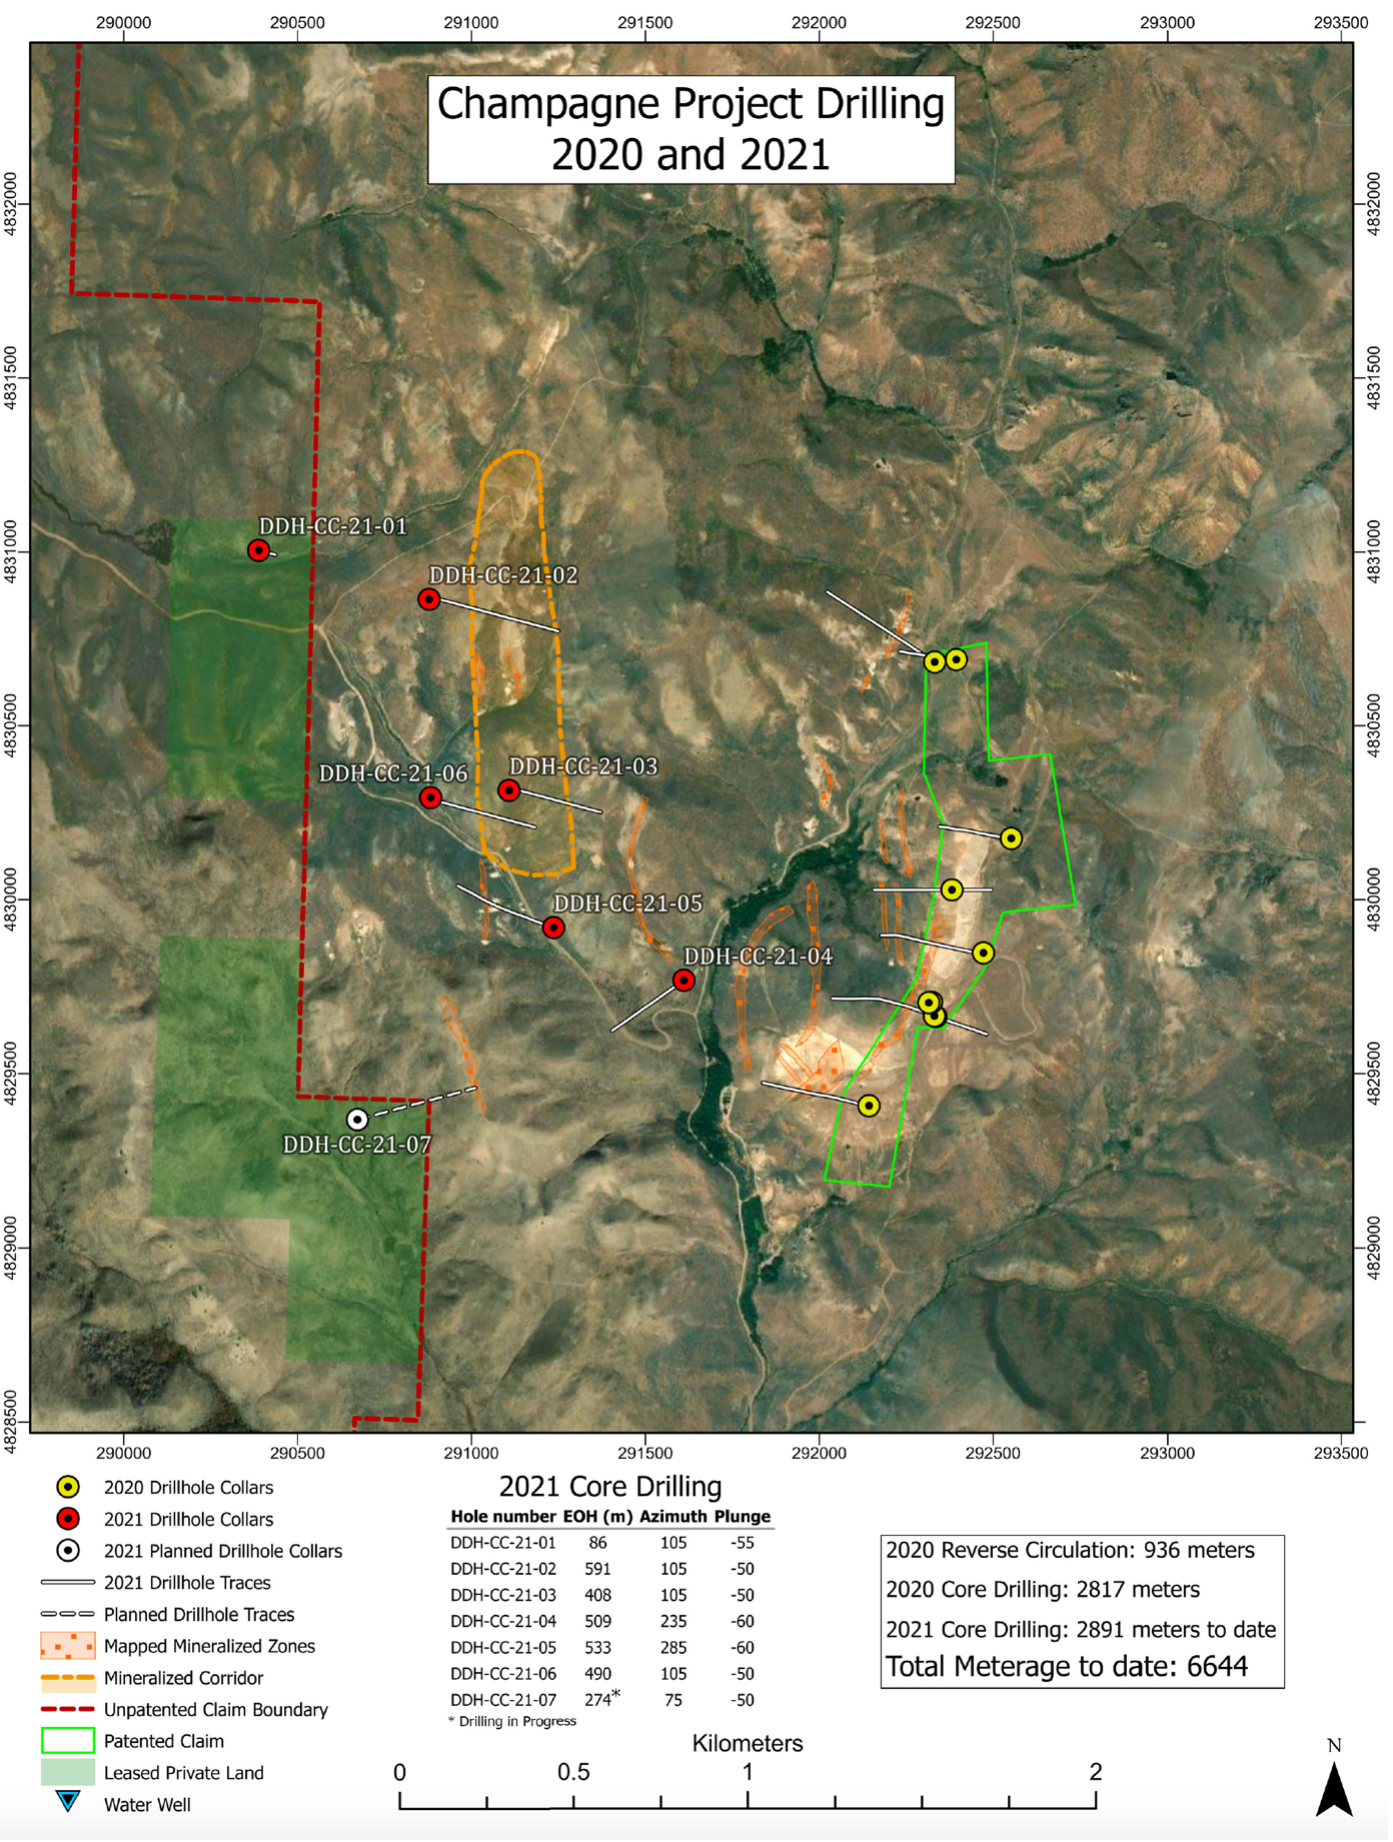 Idaho Champion Gold Mines Canada Inc., Tuesday, September 14, 2021, Press release picture